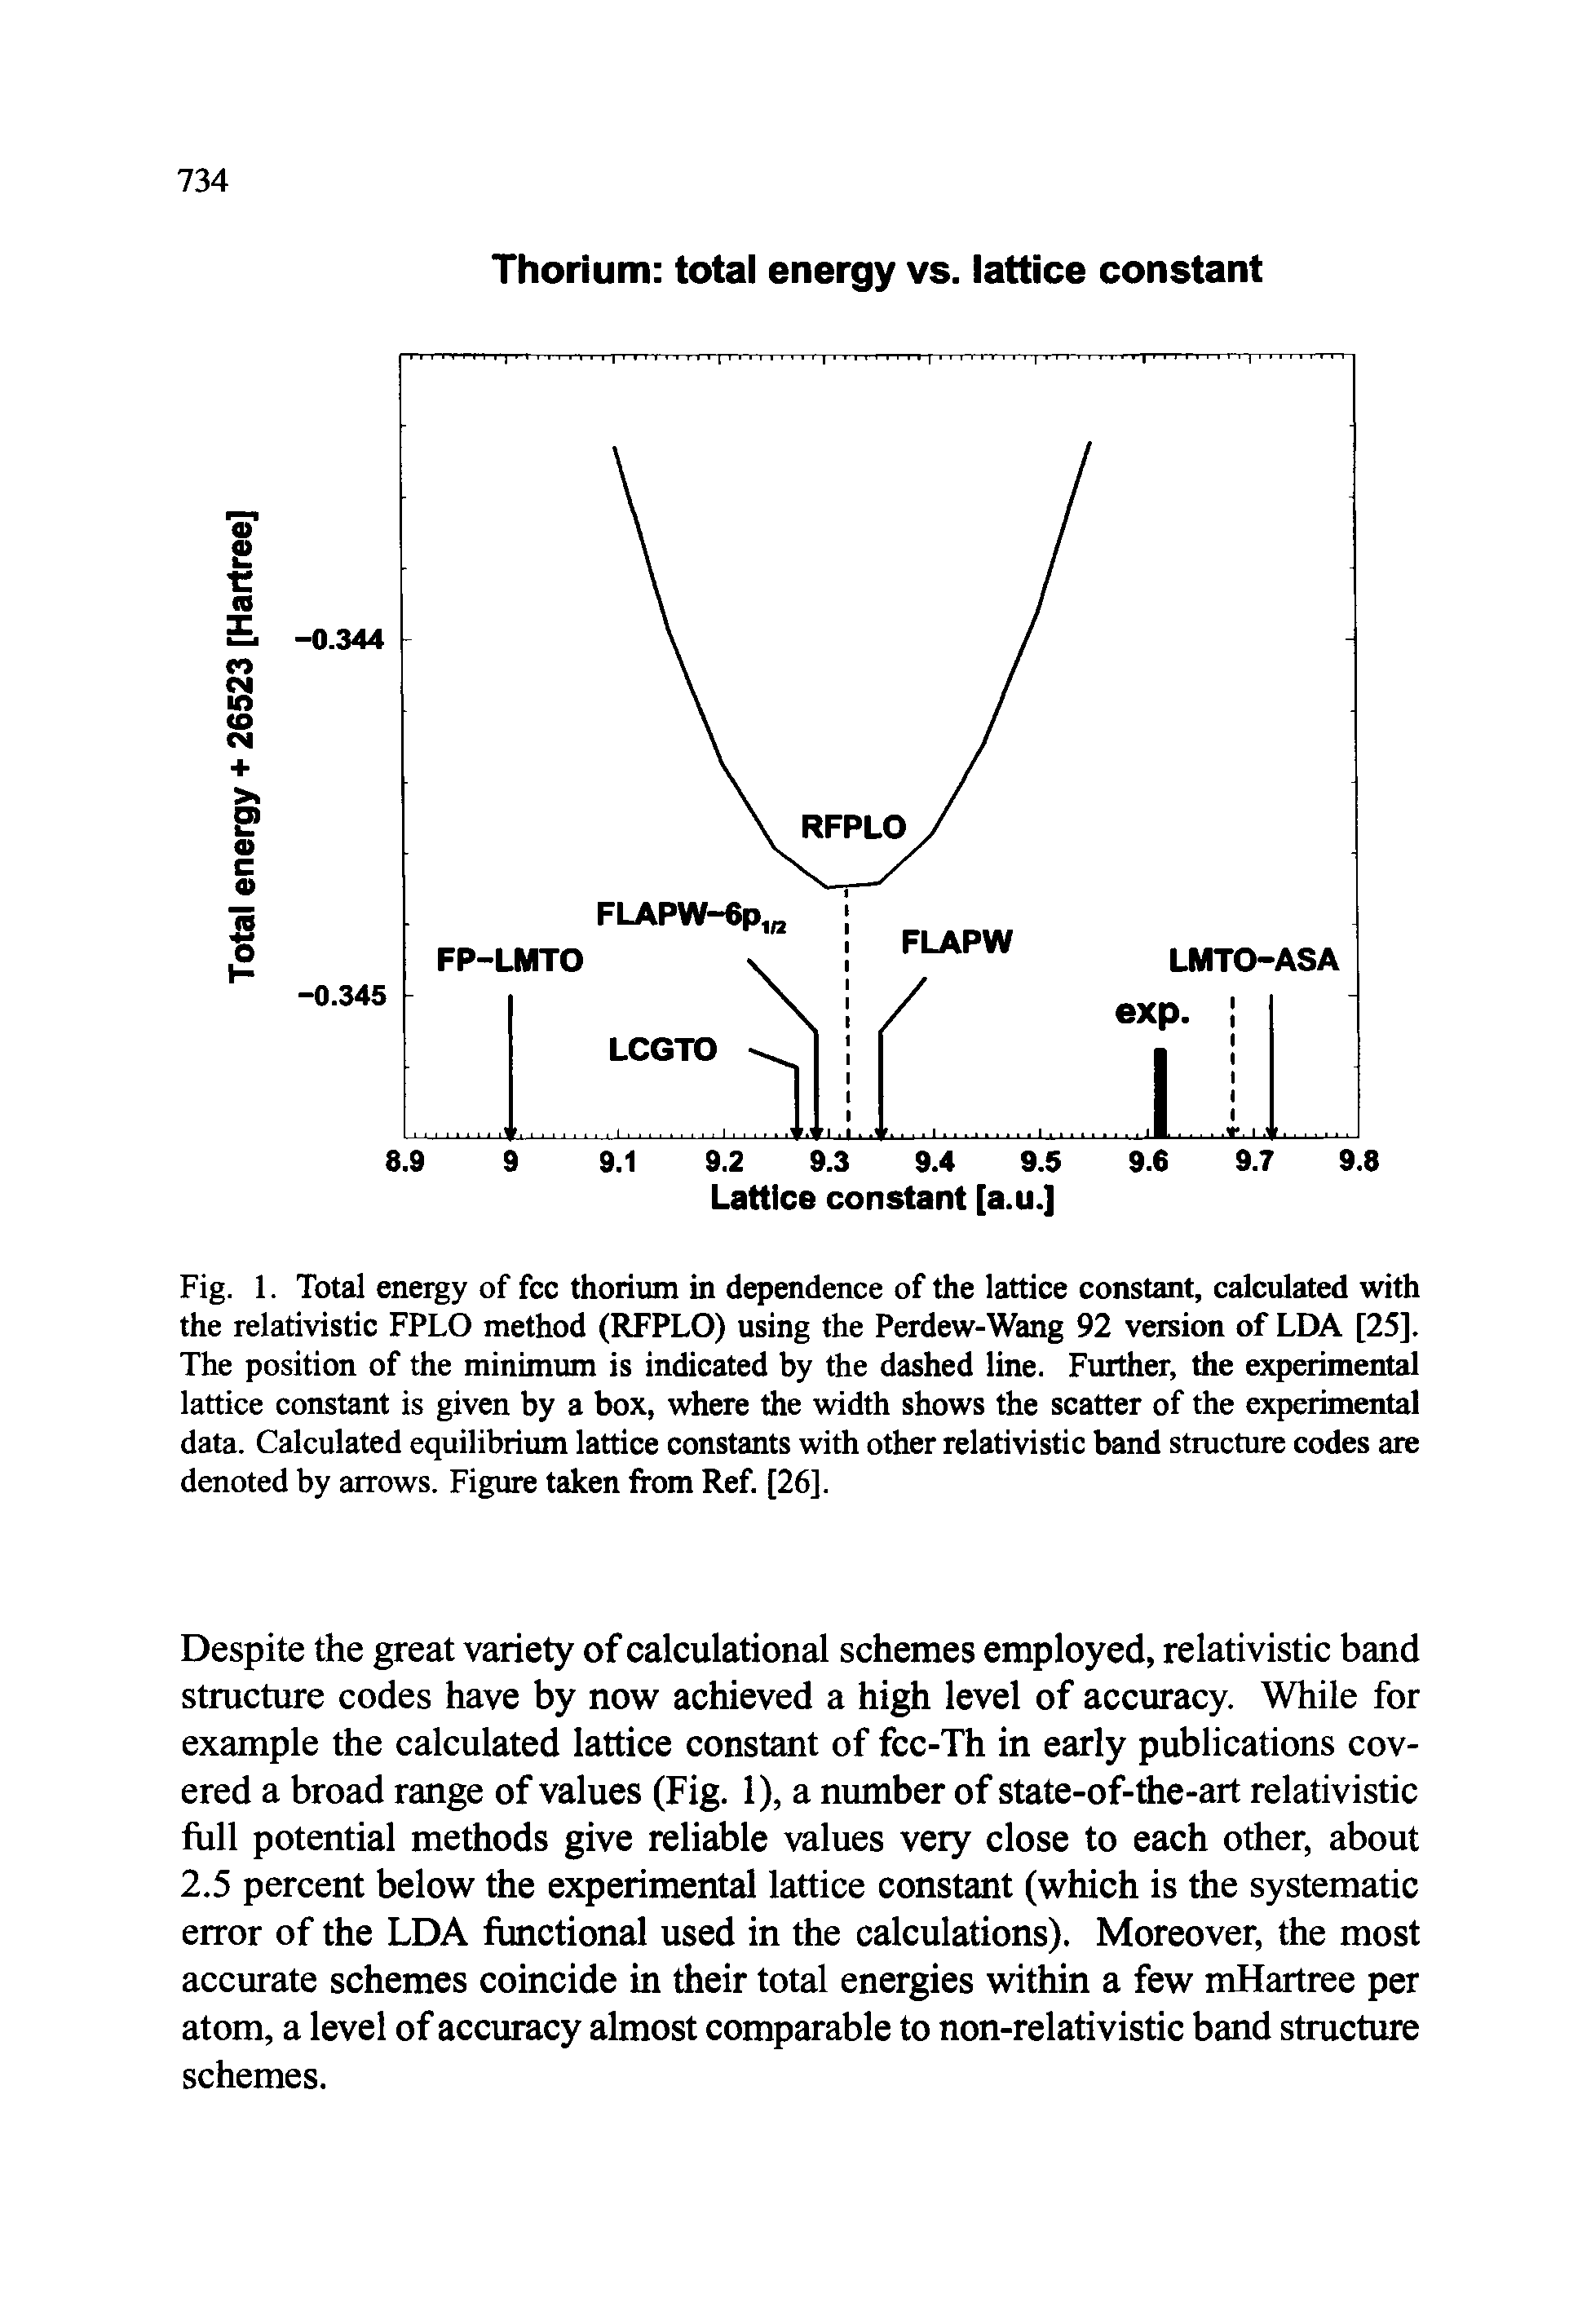 Fig. 1. Total energy of fee thorium in dependenee of the lattiee eonstant, ealeulated with the relativistie FPLO method (RFPLO) using the Perdew-Wang 92 version of LDA [25]. The position of the minimum is indieated by the dashed line. Further, the experimental lattice constant is given by a box, where the width shows the scatter of the experimental data. Calculated equilibrium lattice constants with other relativistic band structure codes are denoted by arrows. Figure taken from Ref. [26].